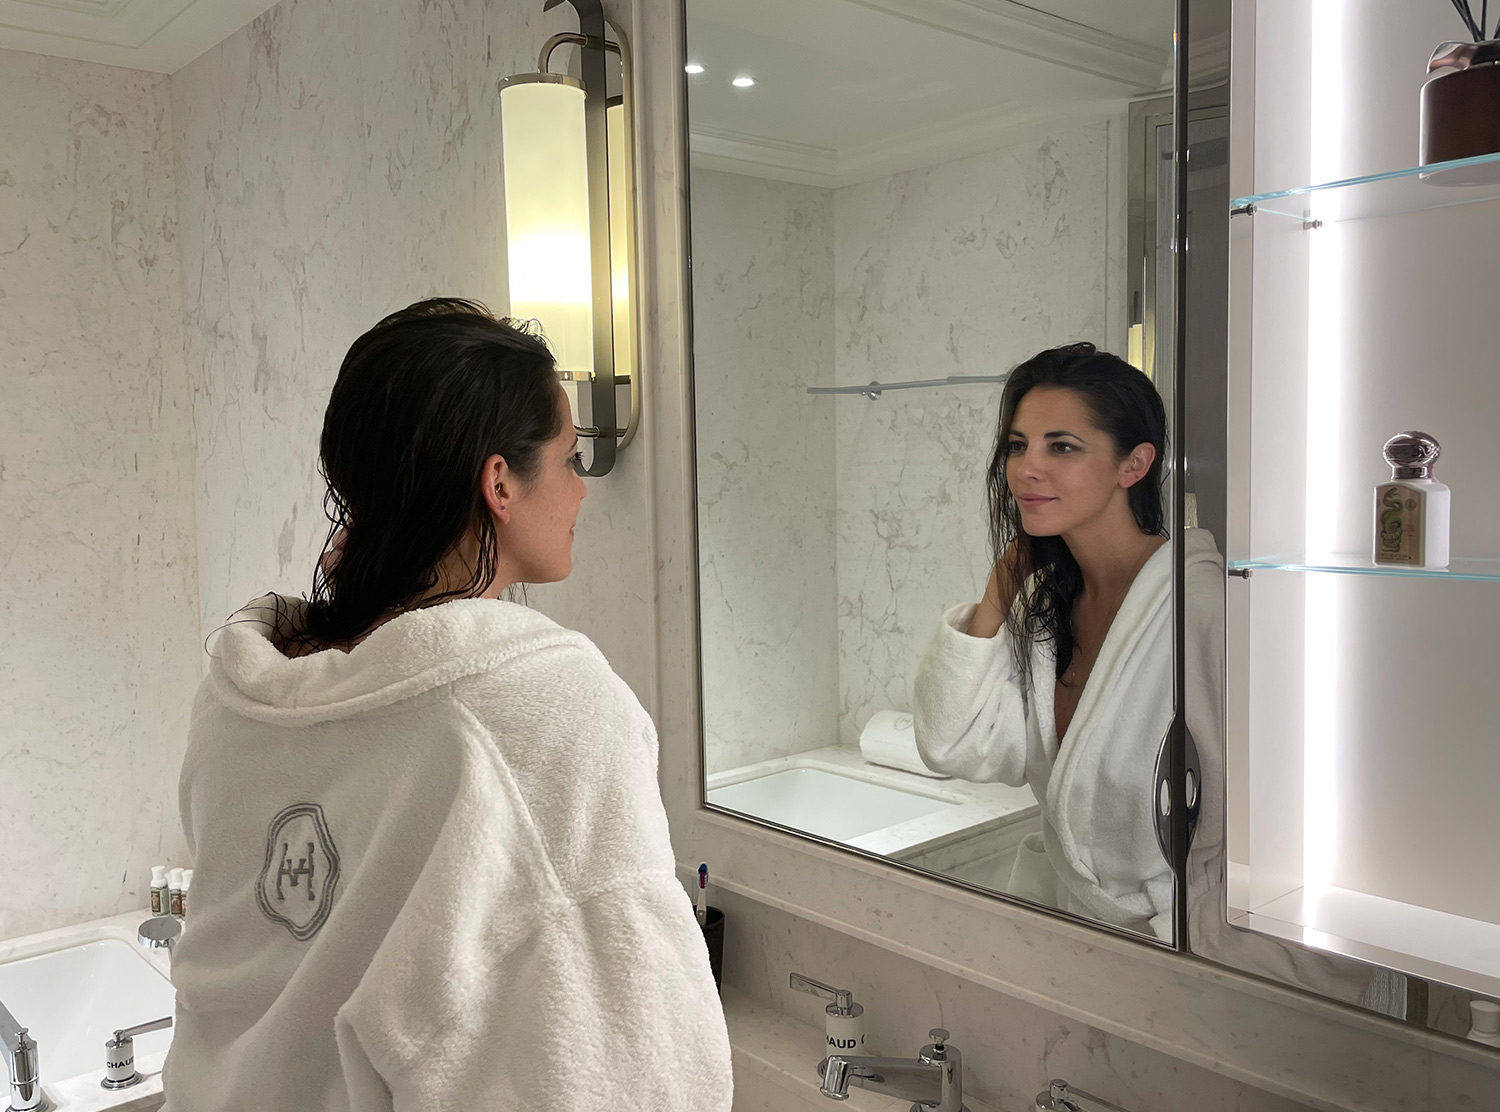 Dancer and Artistic Director Emilie Fouilloux at Maison Villeroy, in Paris. A Sefbook-powered hotel, it offers 24 hour butler and concierge service that make guests feel in the home of their dreams